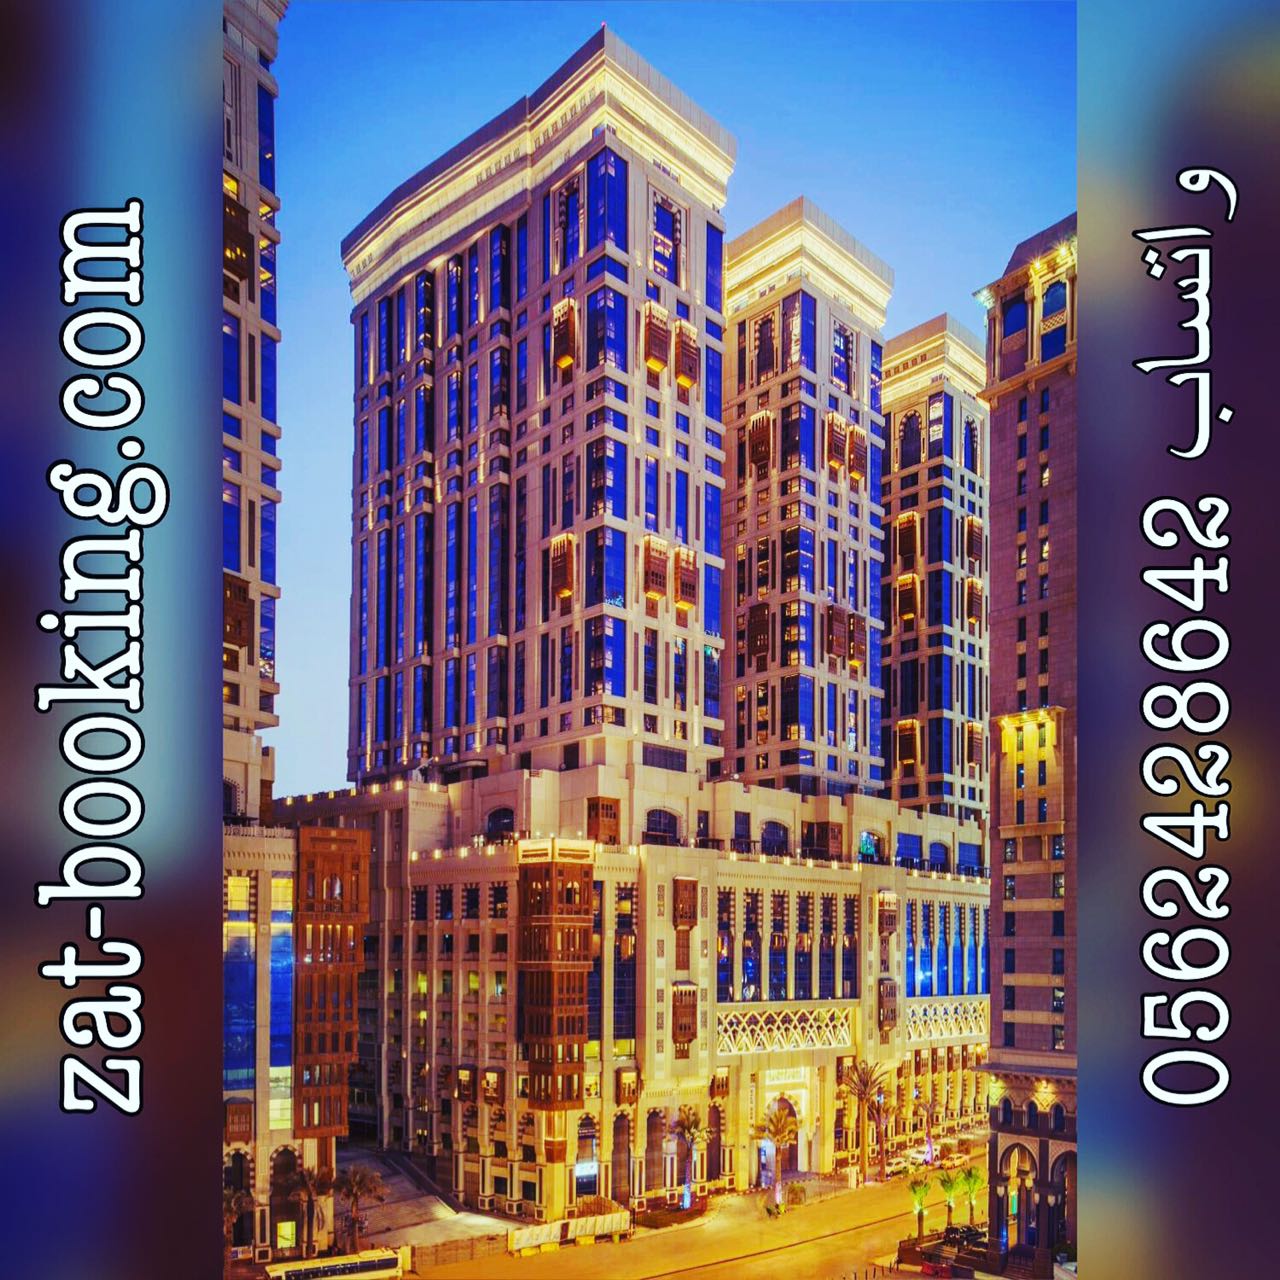 Weekly Offers and Exclusive for Makkah and Madinah Hotels near haram